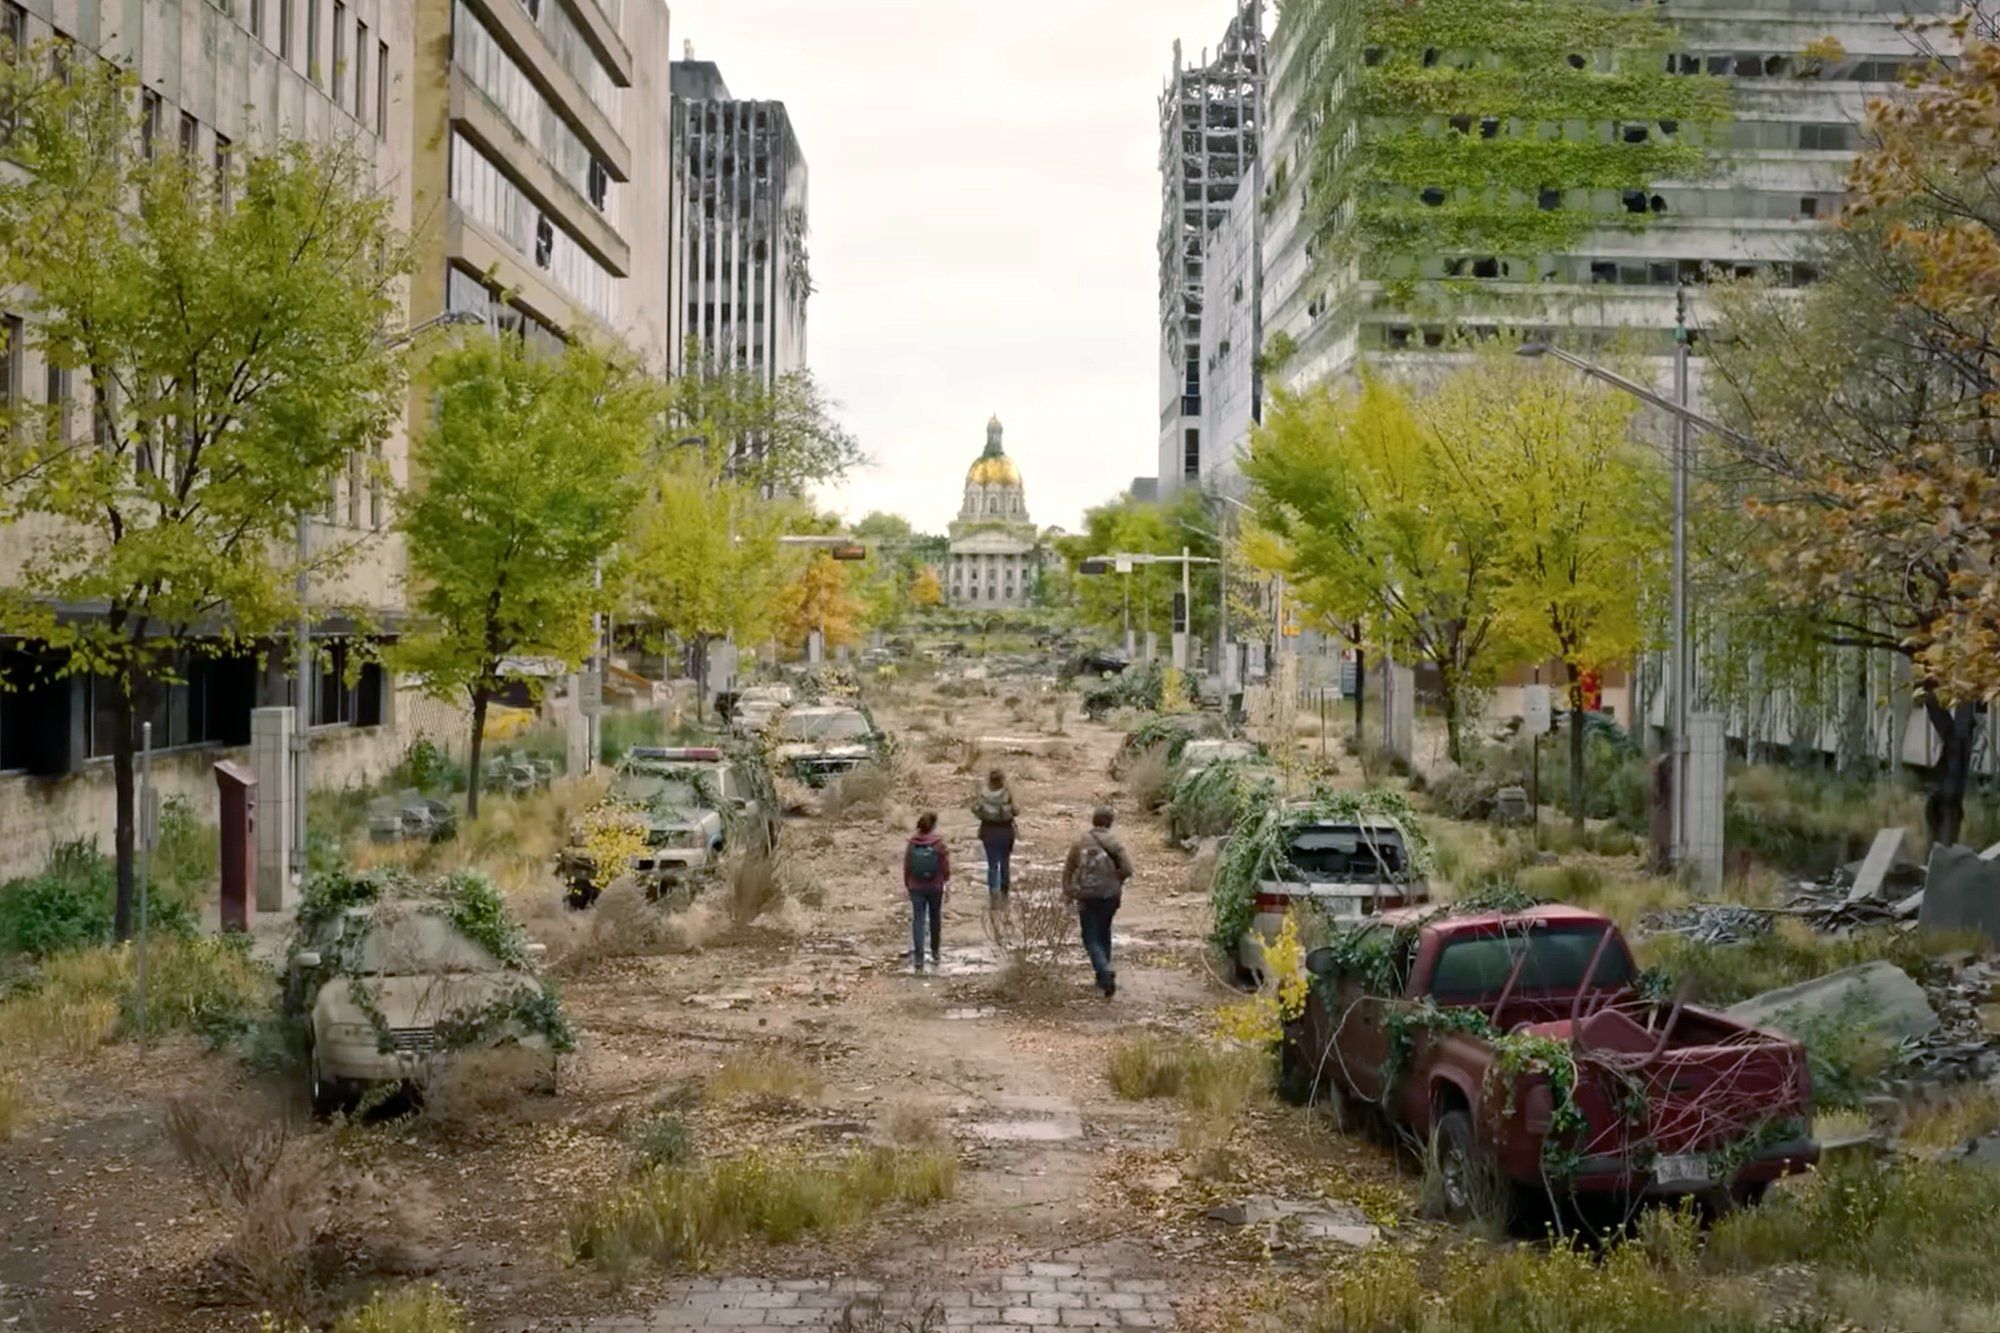 An image from a set from The Last of Us showing a rundown street with trees and grass growing in the road and abandoned cars and the three main characters in the show in the middle of the road